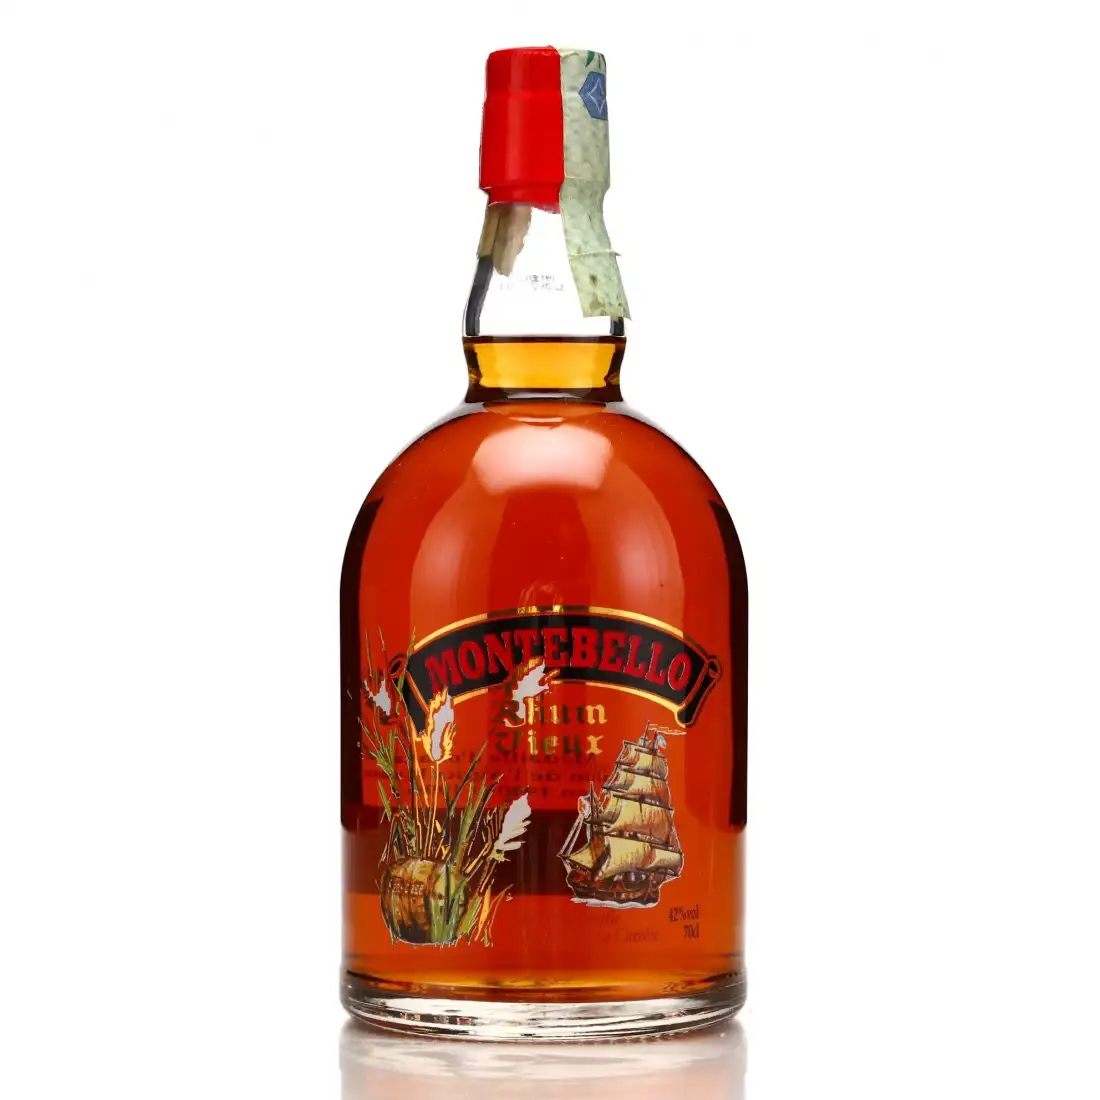 Image of the front of the bottle of the rum Montebello Rhum Vieux Winch